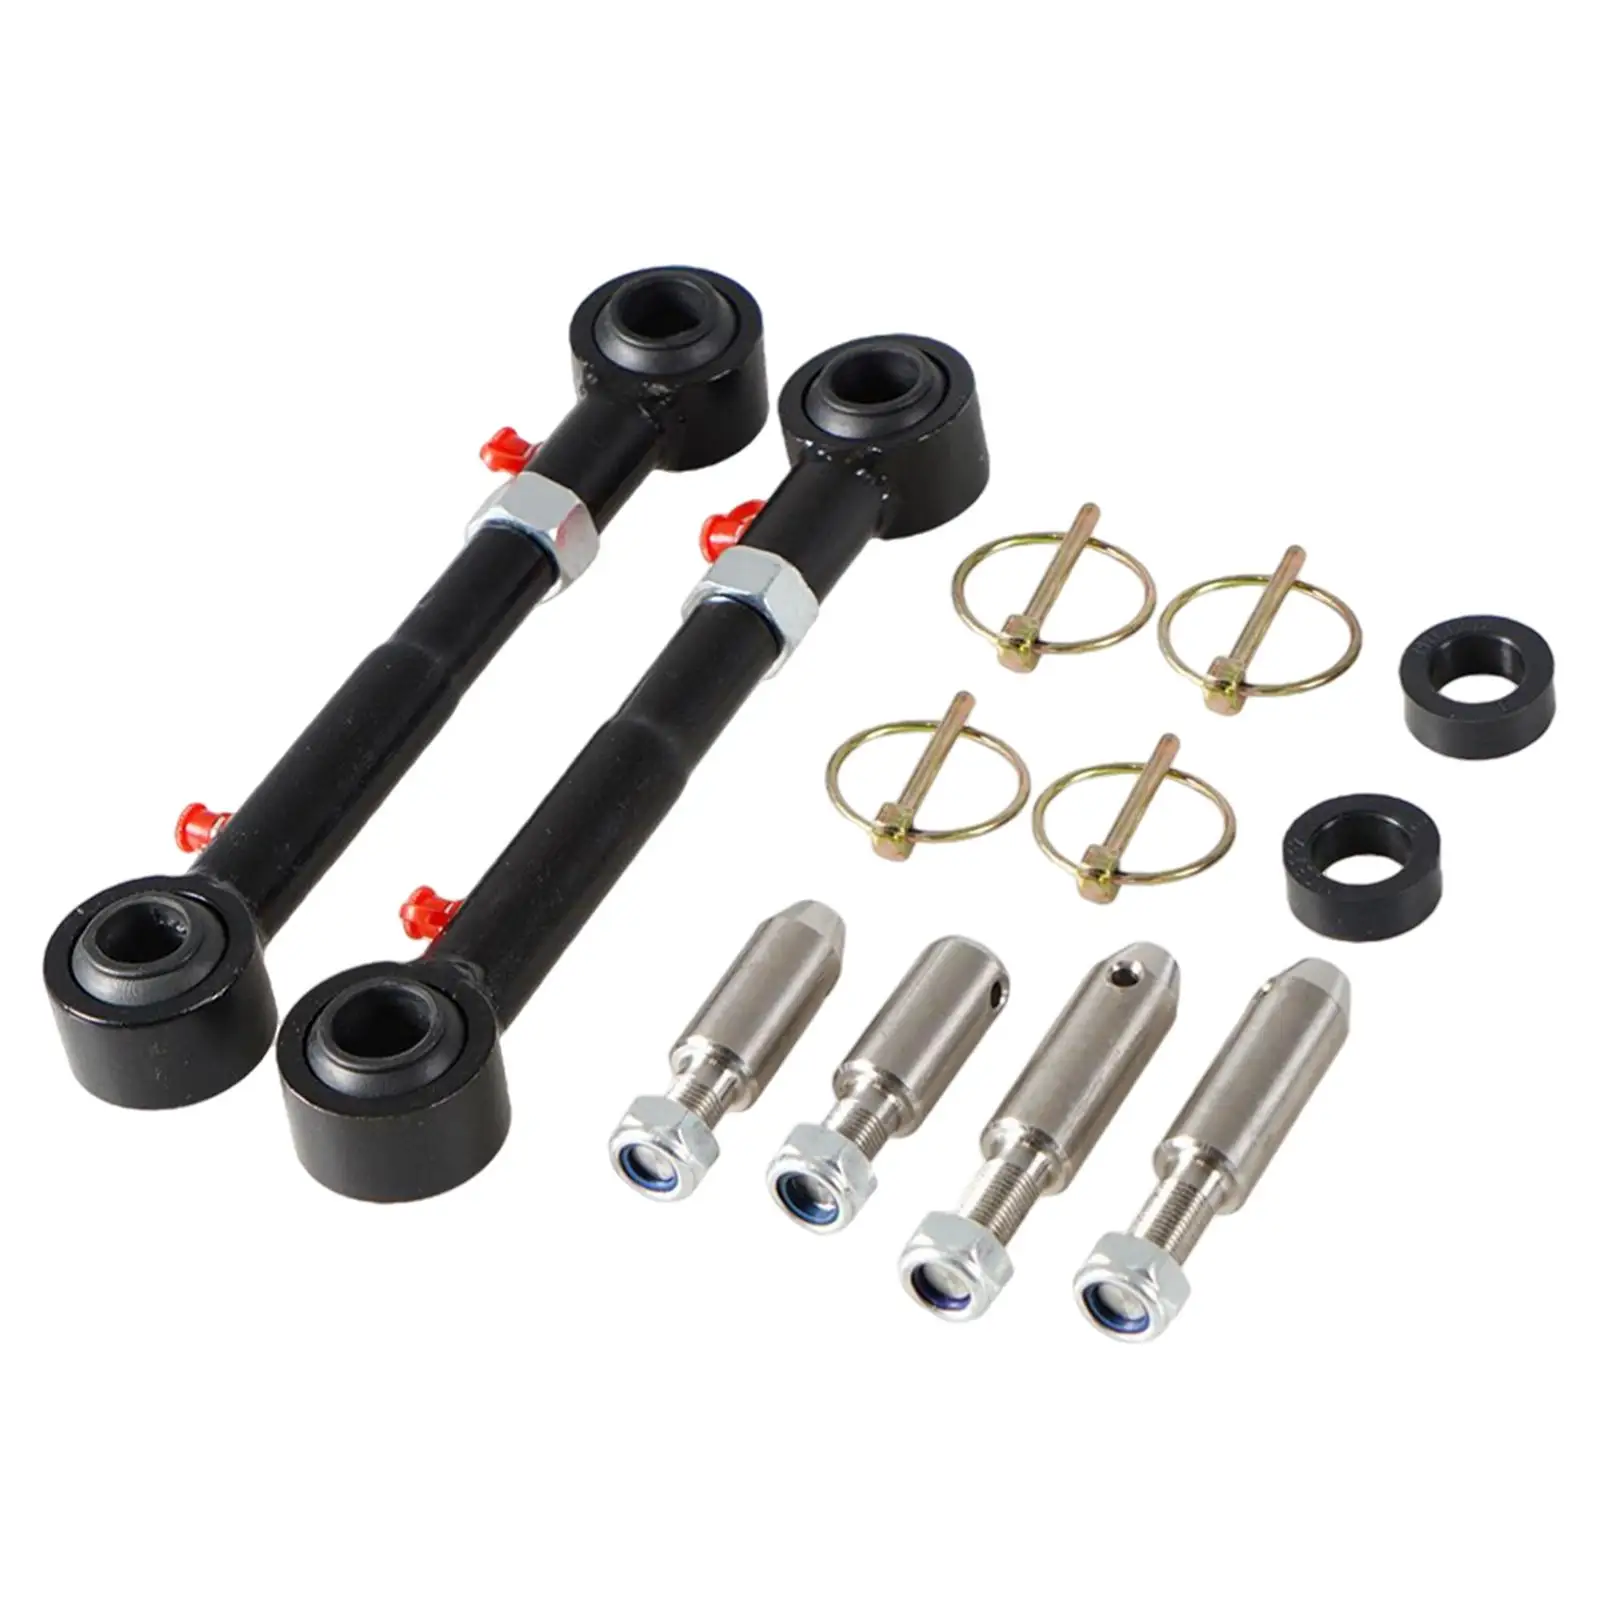 Front Sway Bar Links Disconnects Fit for Jeep Wrangler JK Jku 07-18 Parts